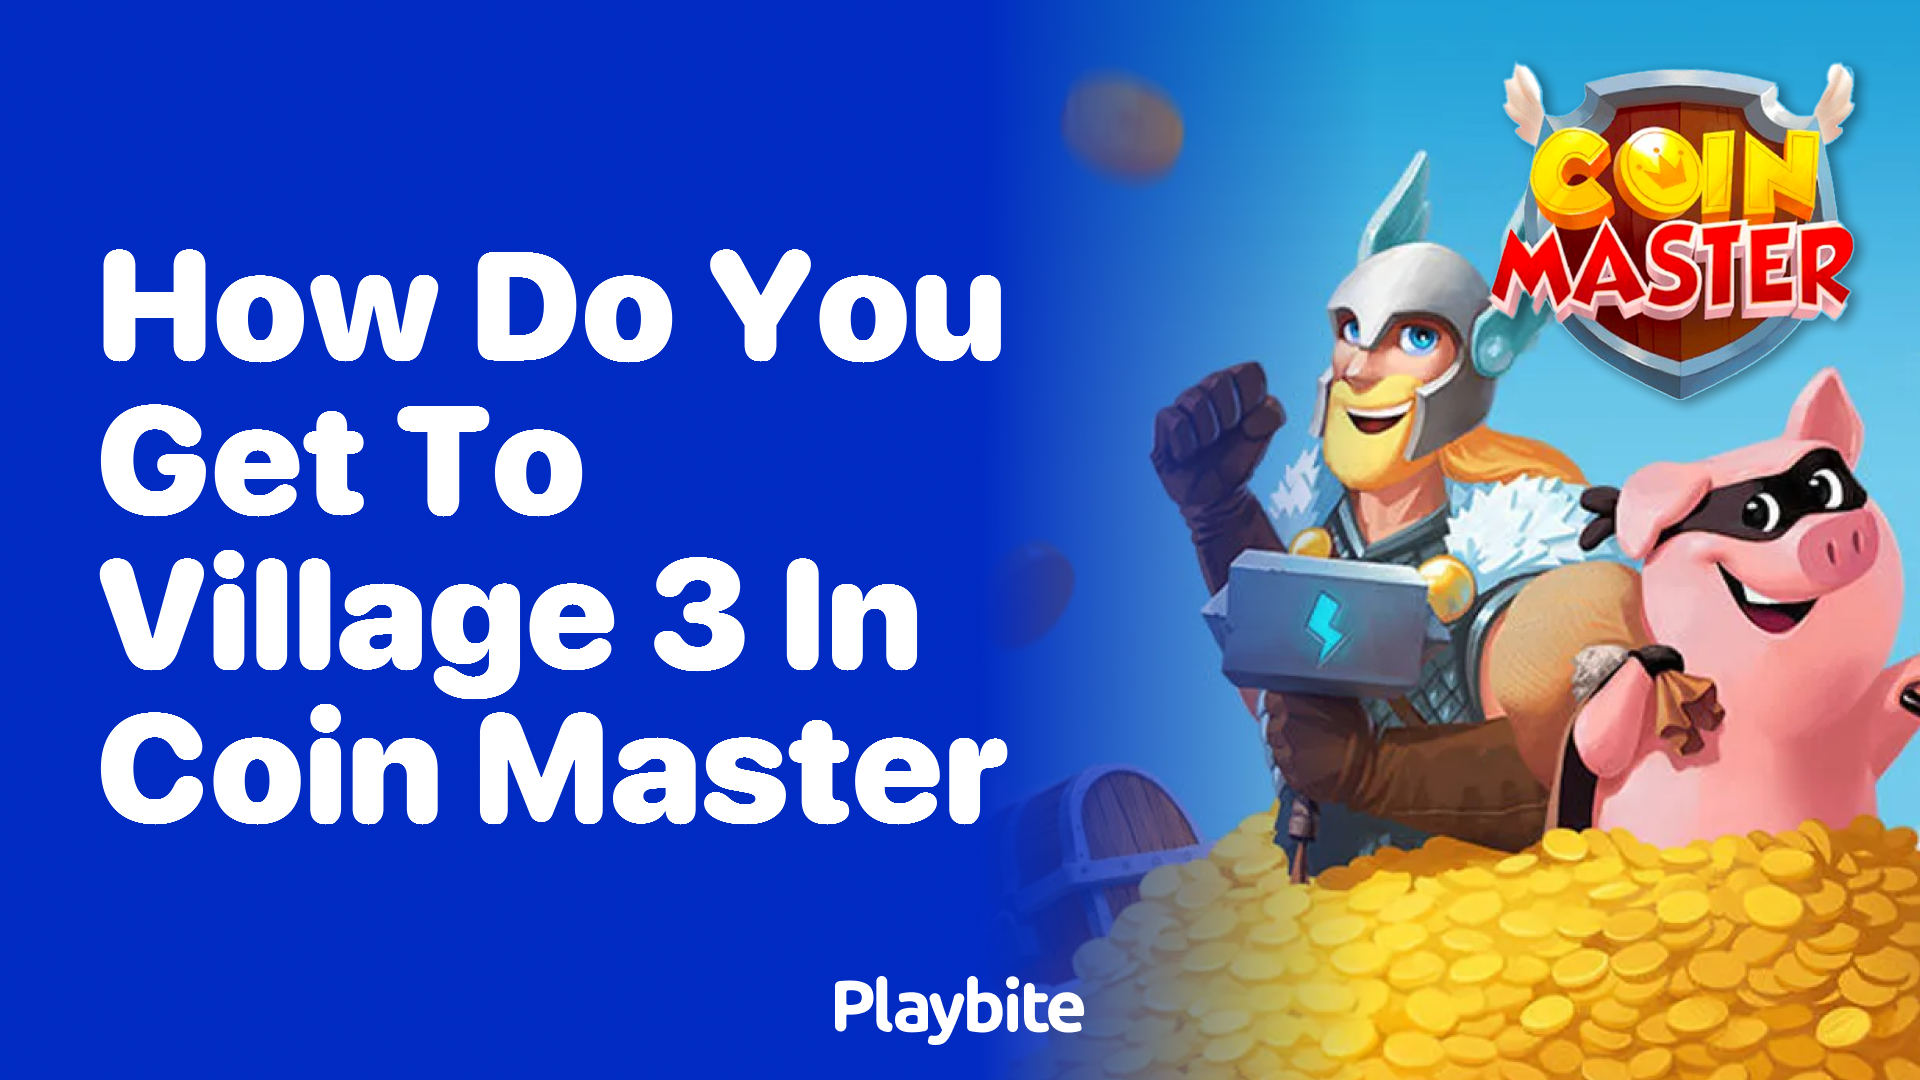 What Will Be the Next Event in Coin Master? - Playbite